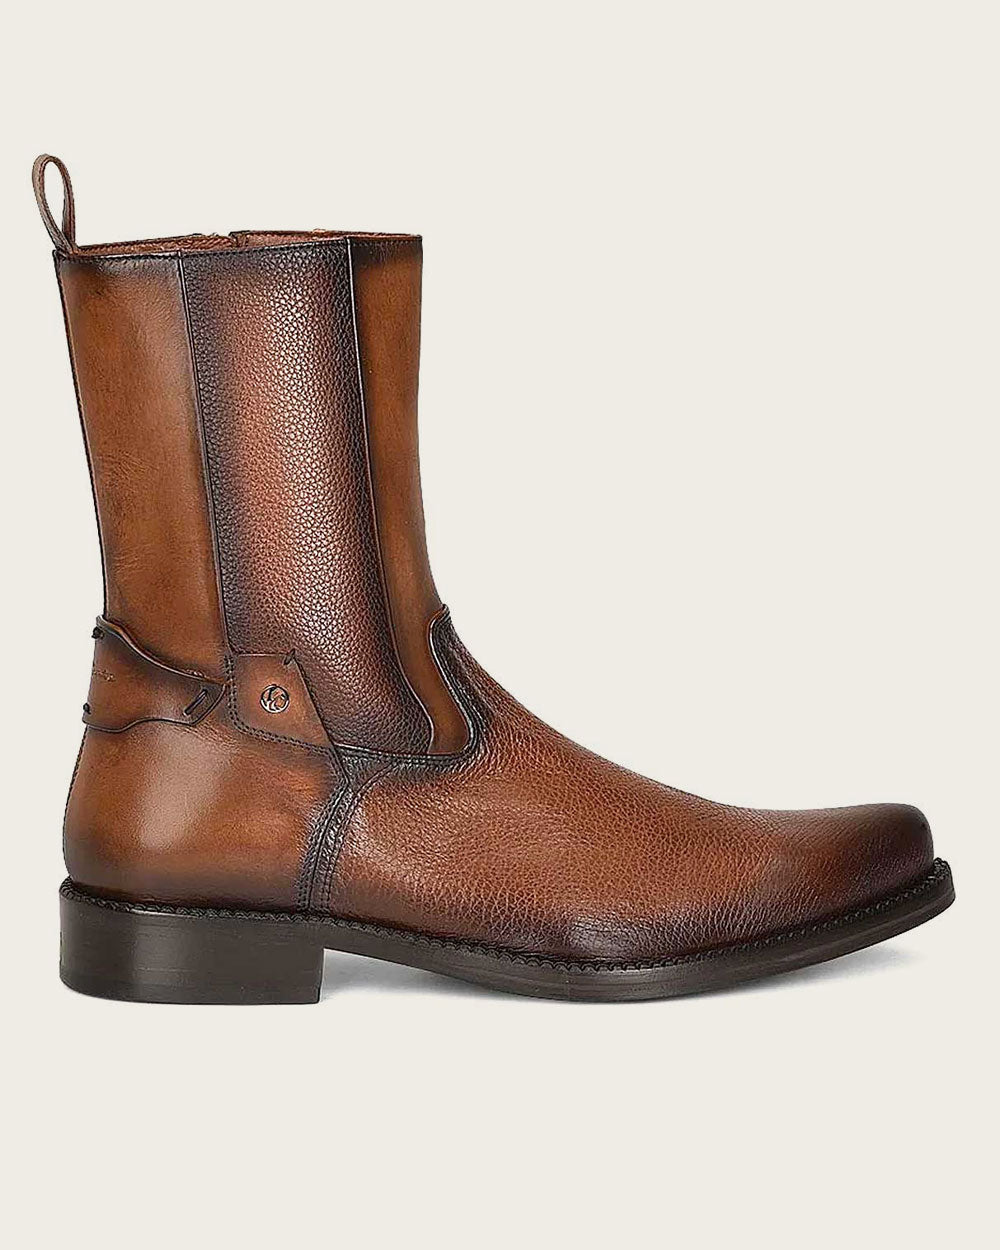 Formal or Special Events: Cuadra's boots add elegance to any occasion.